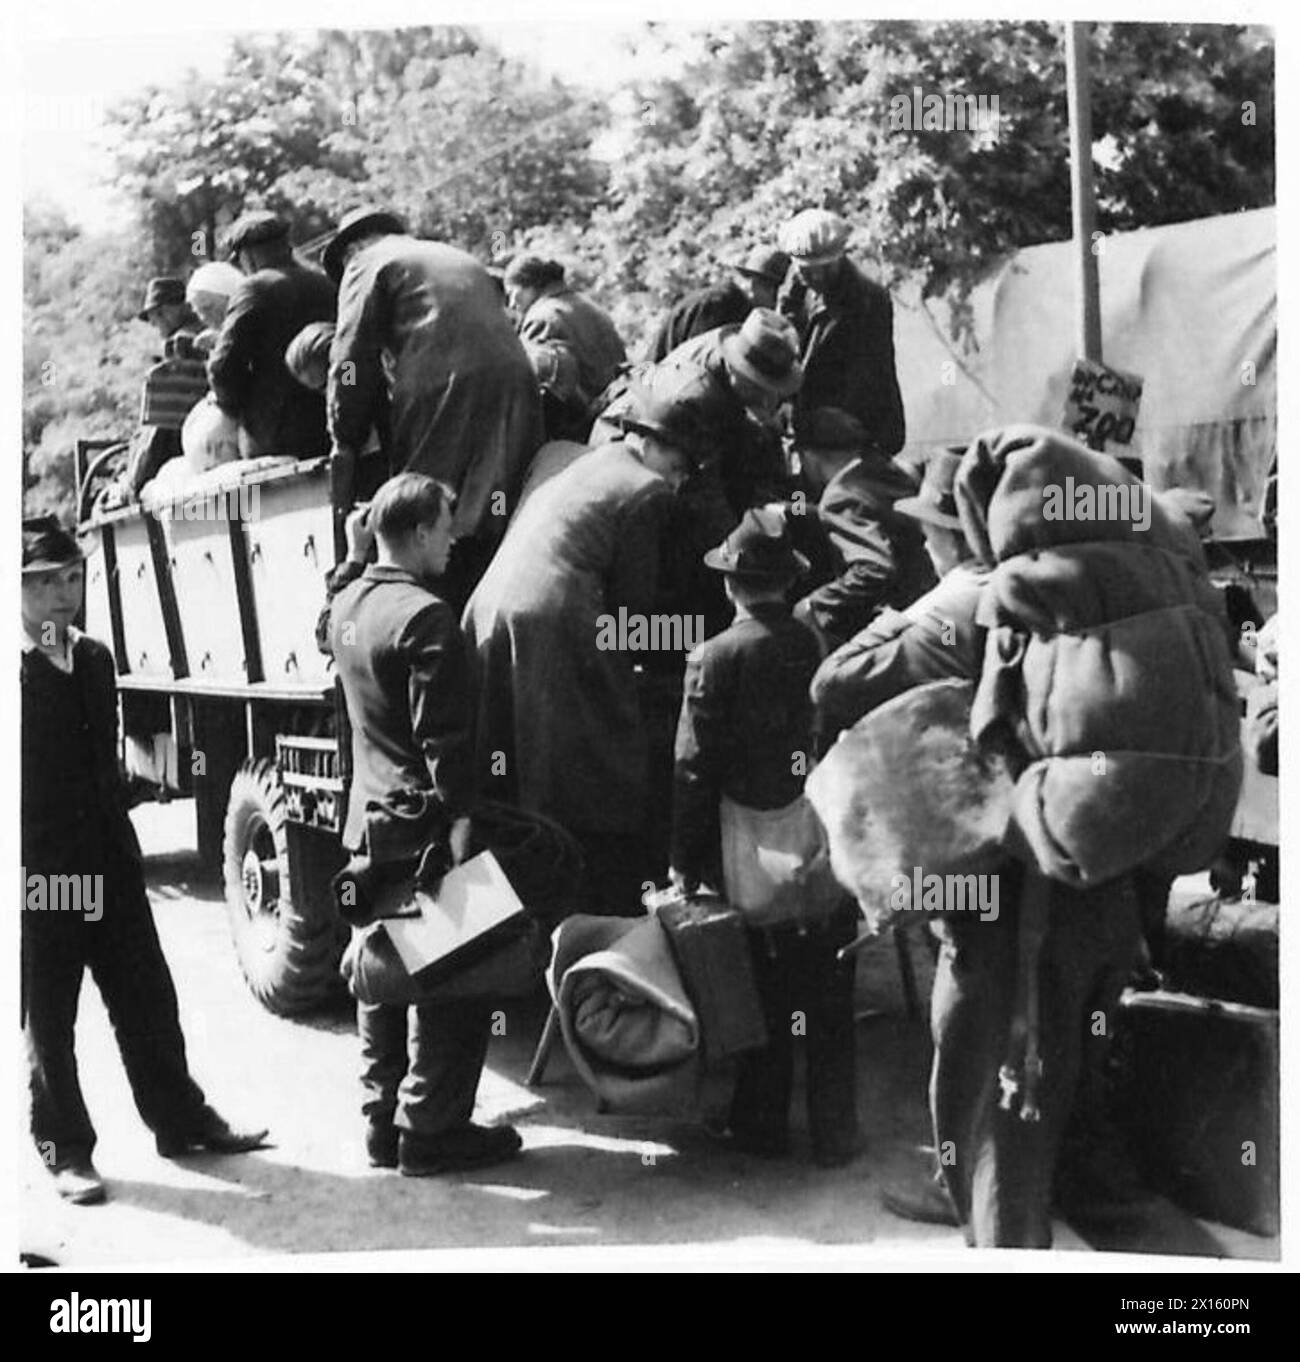 DISPLACED PERSONS AND REFUGEES IN GERMANY - Polish nationals boarding army lorries to take them from No.17 Displaced Persons Assembly Centre at Hamburg Zoological Gardens to a Polish national camp for repatriation. The Displaced Persons camp within the grounds of Hamburg Zoo was build by the Blohm & Voss company during WWII to house the forced labourers that worked in their factory. The camp was taken over by the British on 5 May 1945 and quickly given over as an arrivals centre for displaced persons. On arrival displaced persons were organised into groups of 50 for processing through the rece Stock Photo